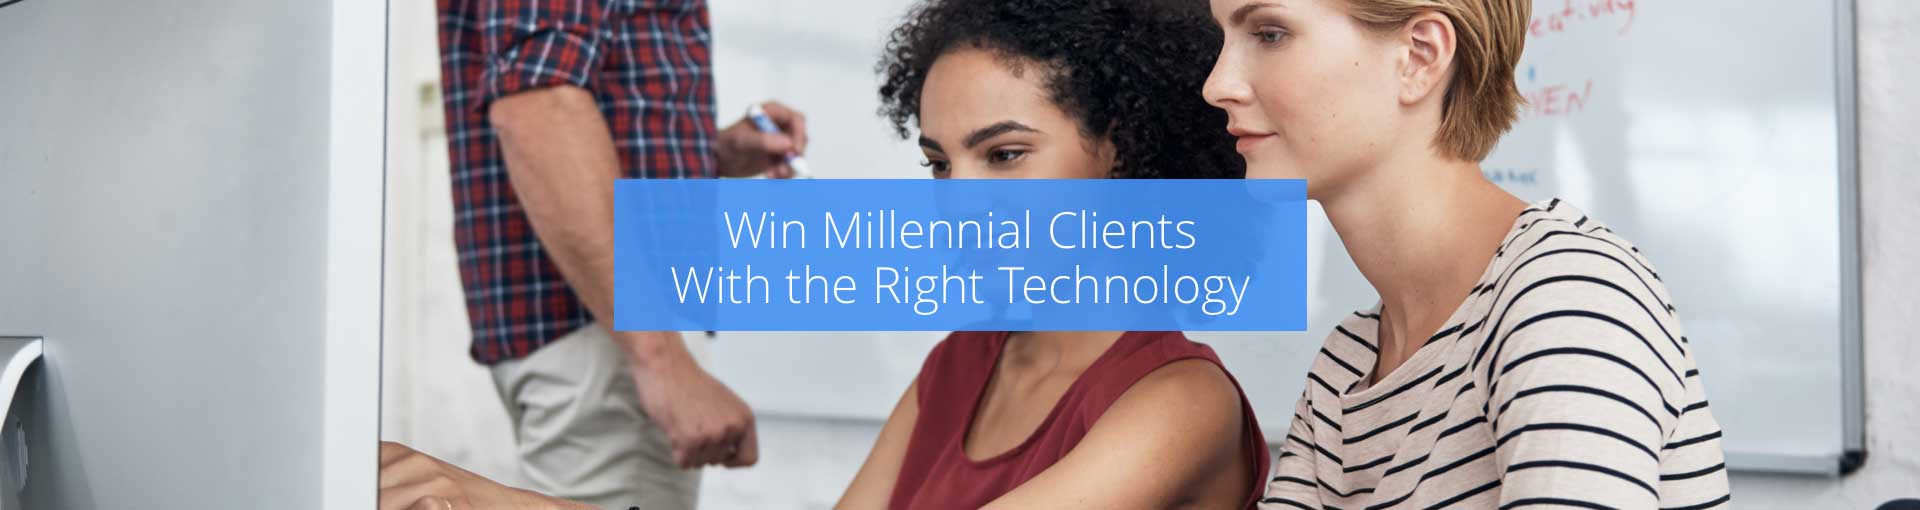 Win Millennial Clients With the Right Technology Featured Image